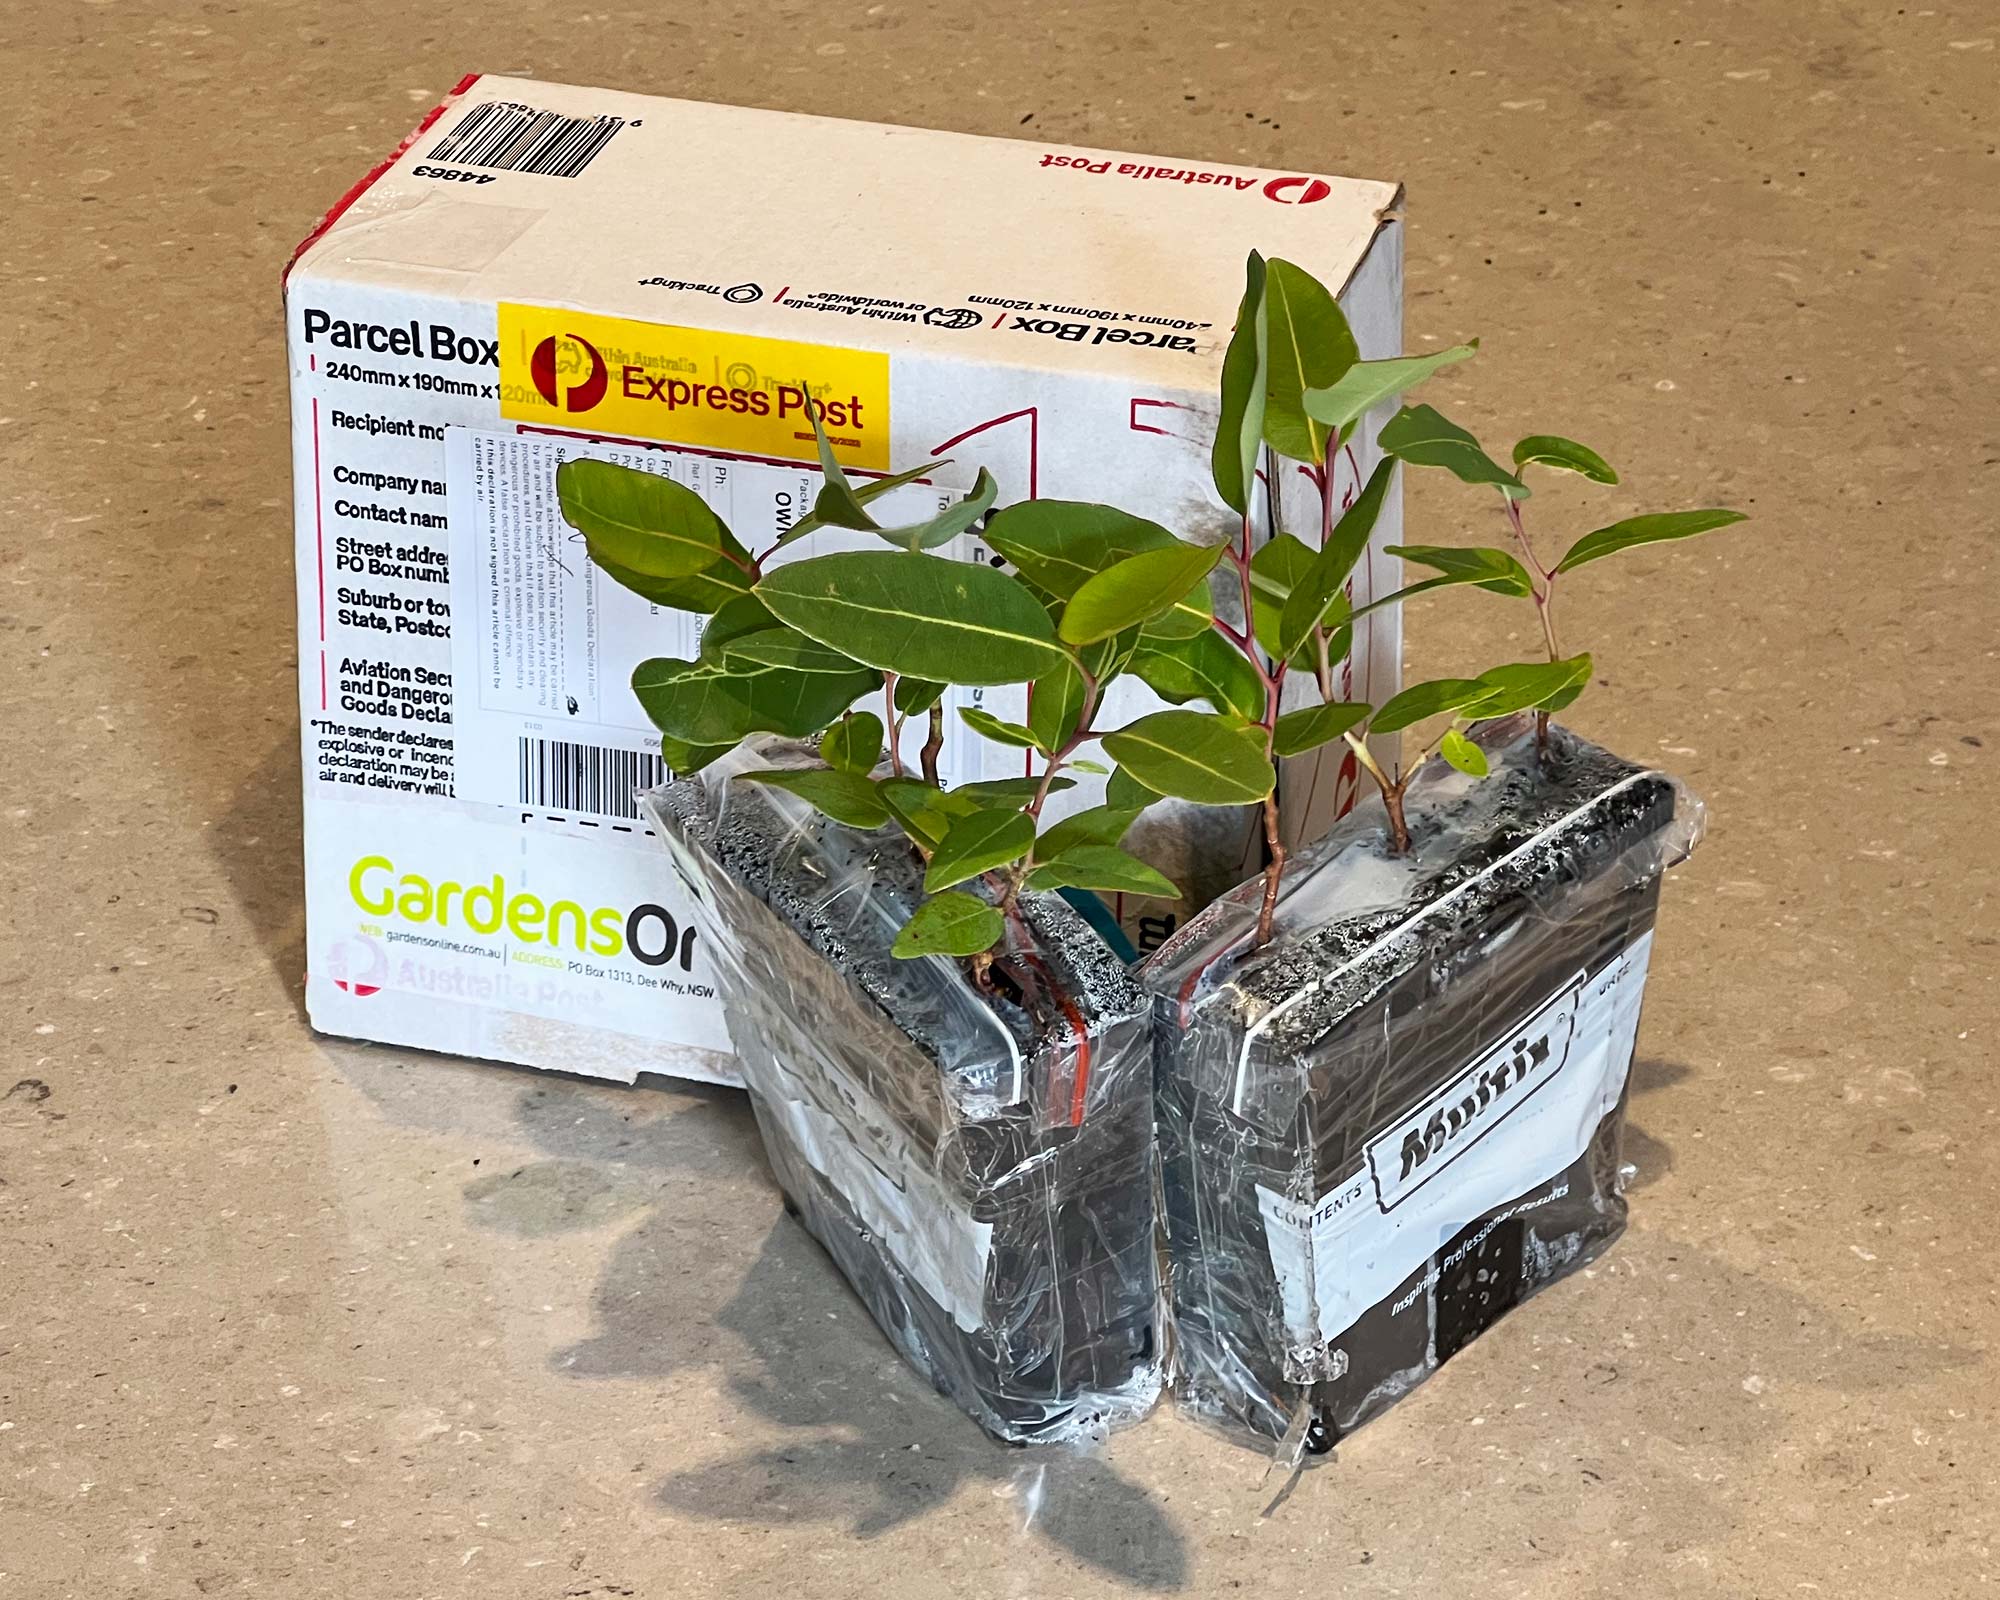 Packaged plants sent by Express Post